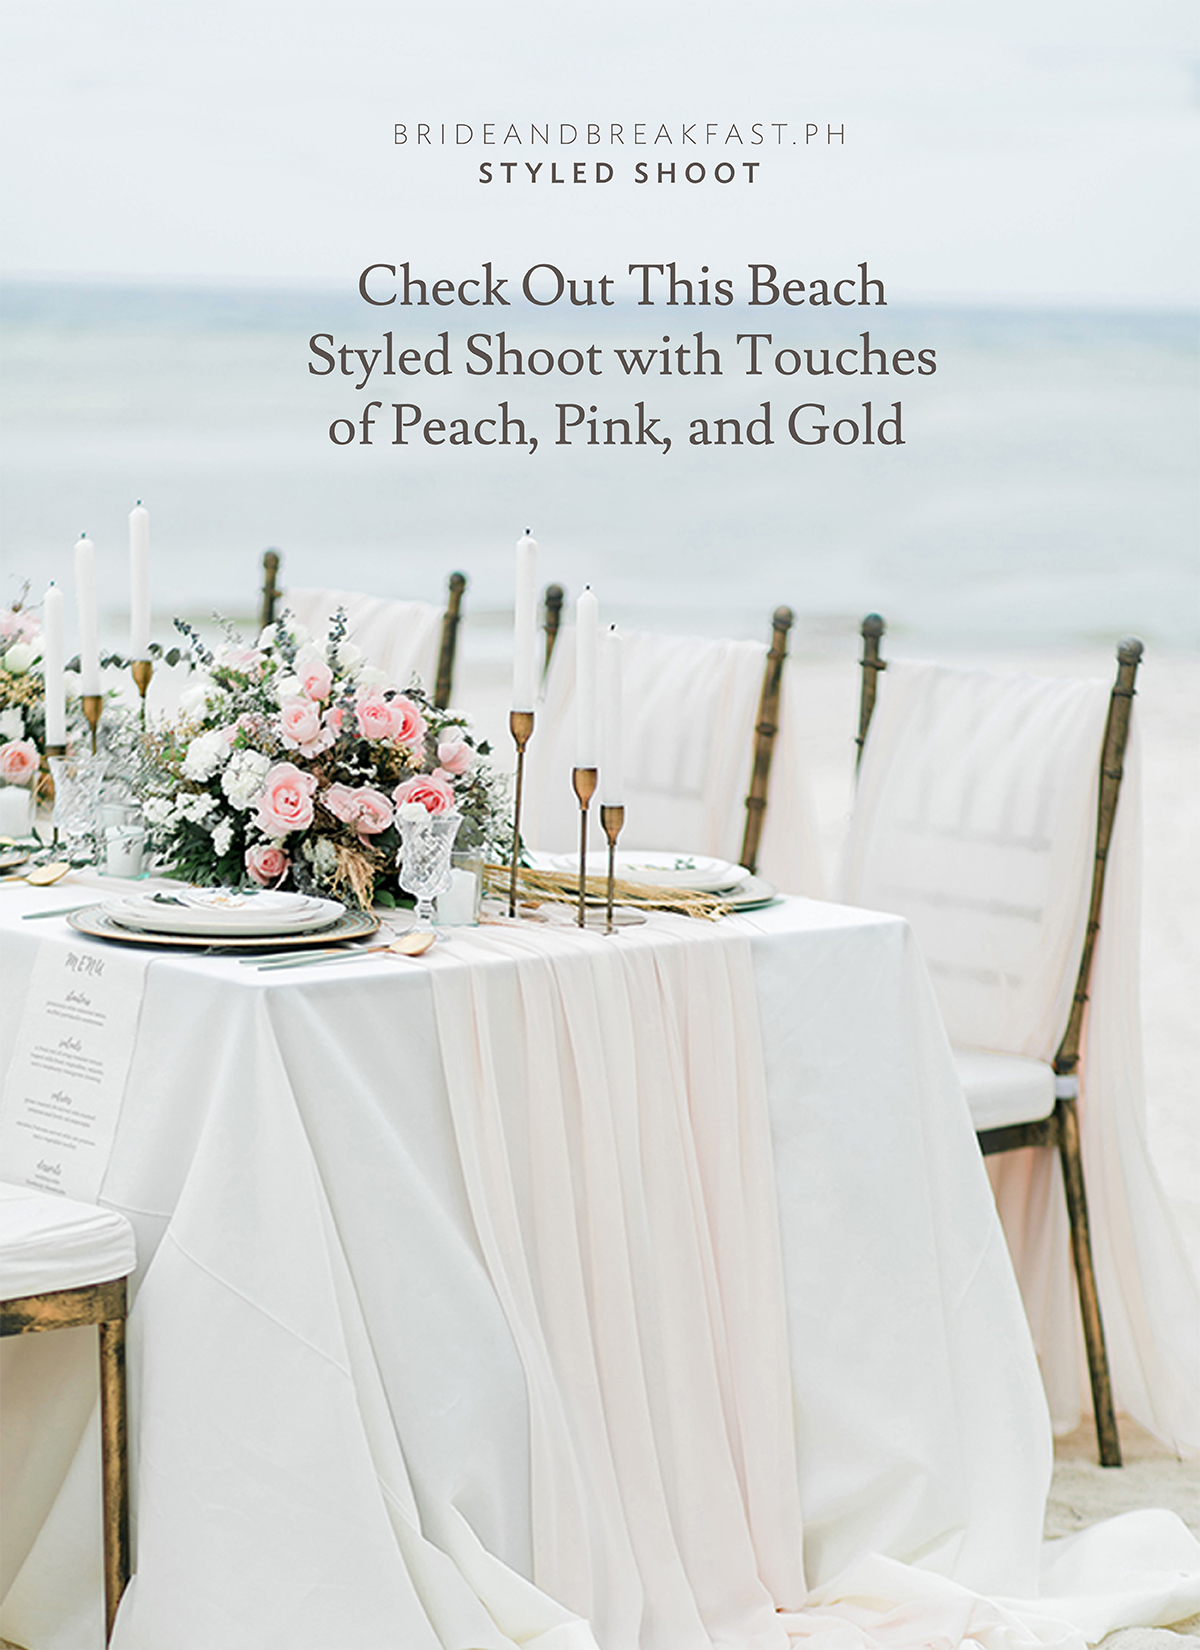 Check Out This Beach Styled Shoot with Touches of Peach, Pink, and Gold